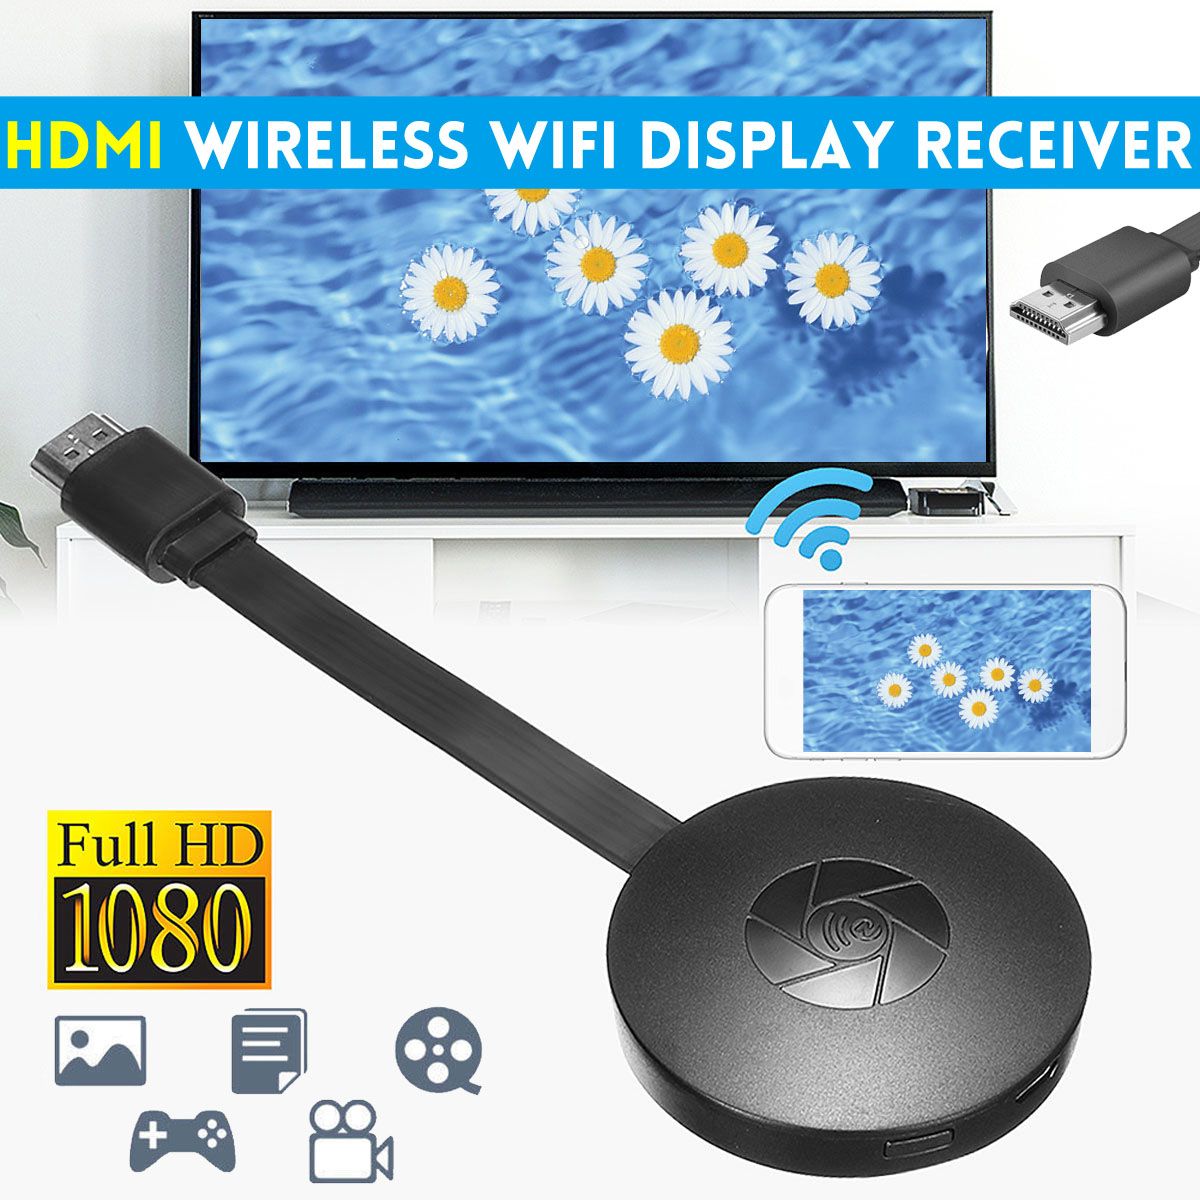 G2-TV-Stick-Wireless-Mirascreen-1080P-HD-Anycast-Miracast-DLNA-Receptor-Display-Dongle-for-Netflix-Y-1701750